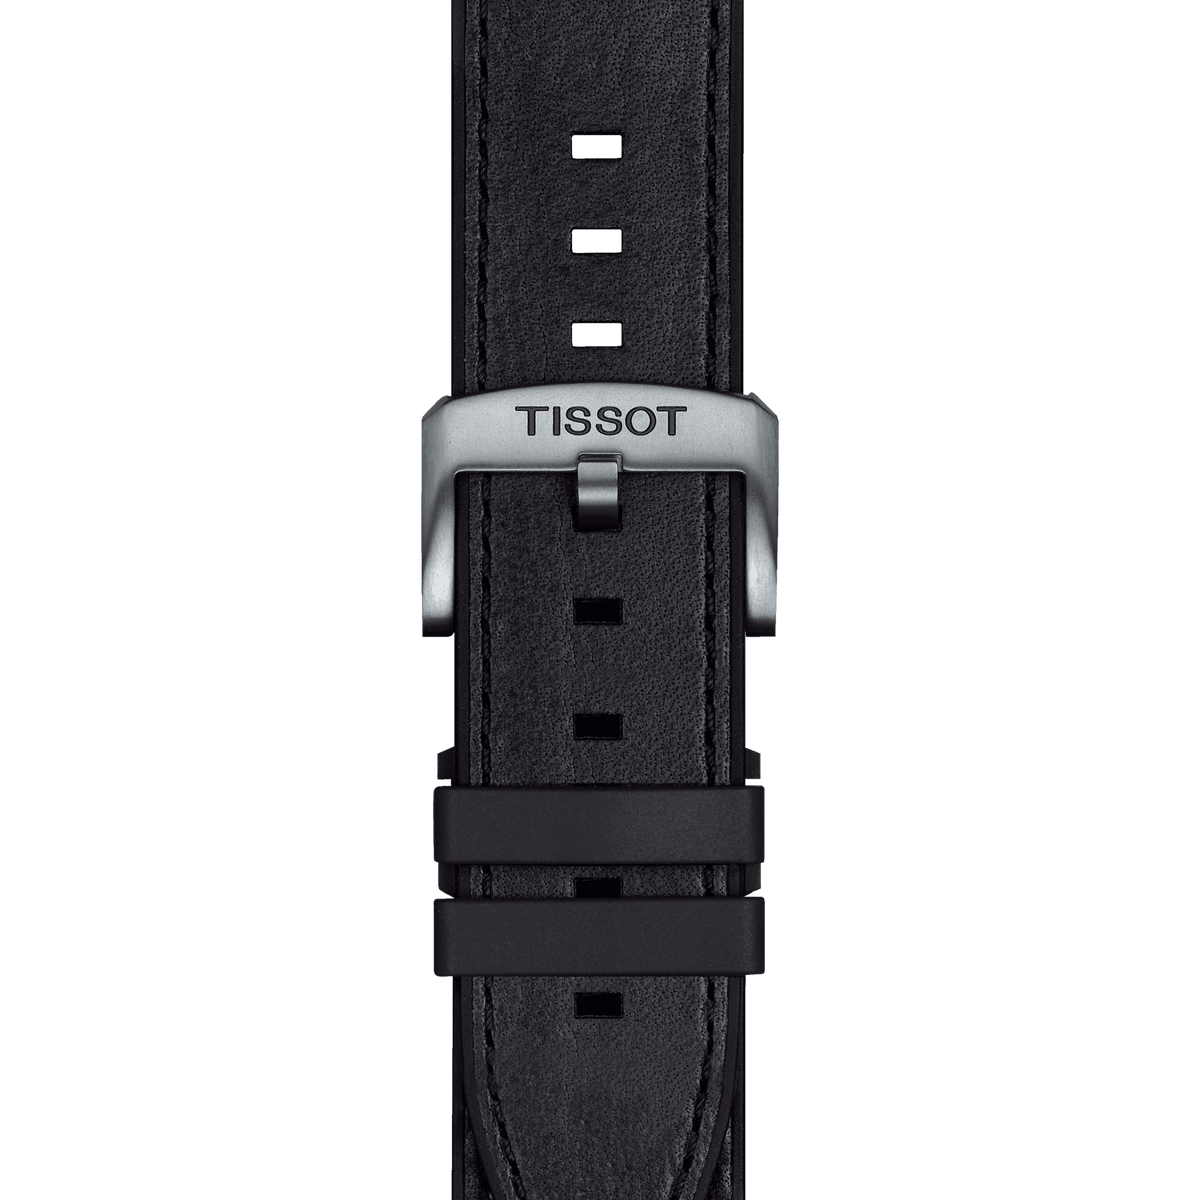 TISSOT OFFICIAL BLACK LEATHER STRAP LUGS 23 MM